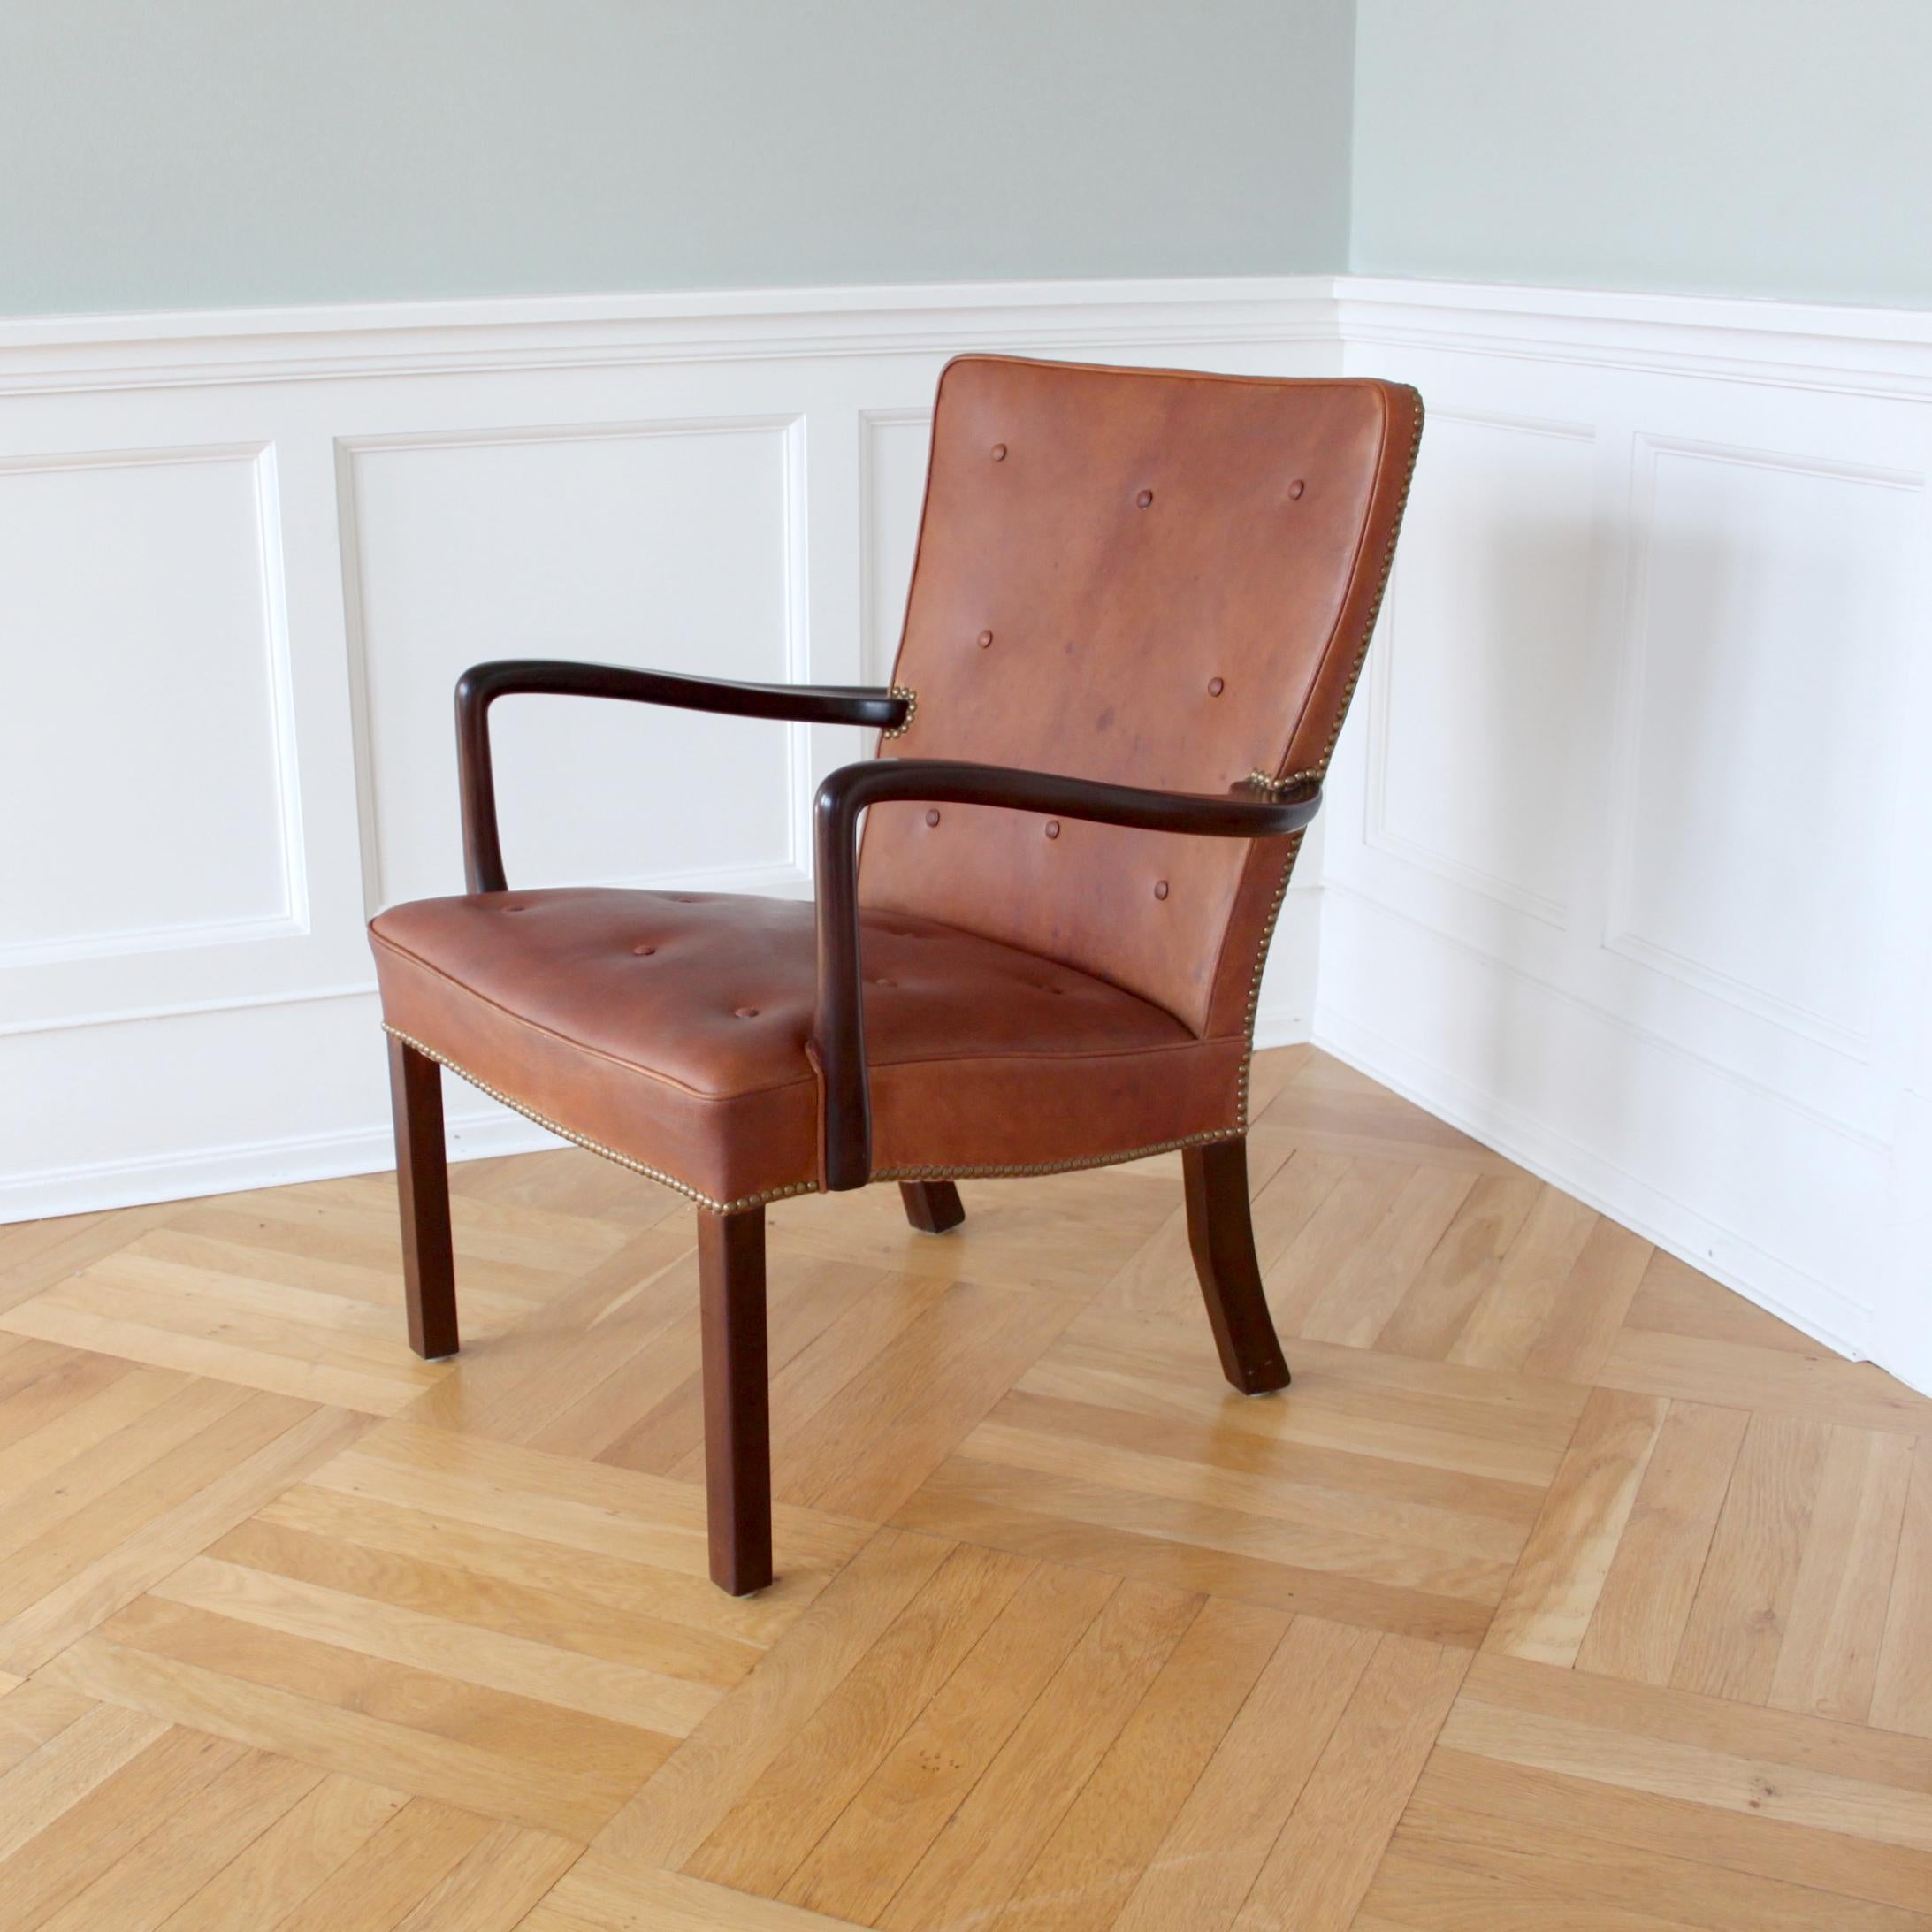 Pair of Jacob Kjær Lounge Chairs Mahogany and Niger Leather, Scandinavian Modern For Sale 2